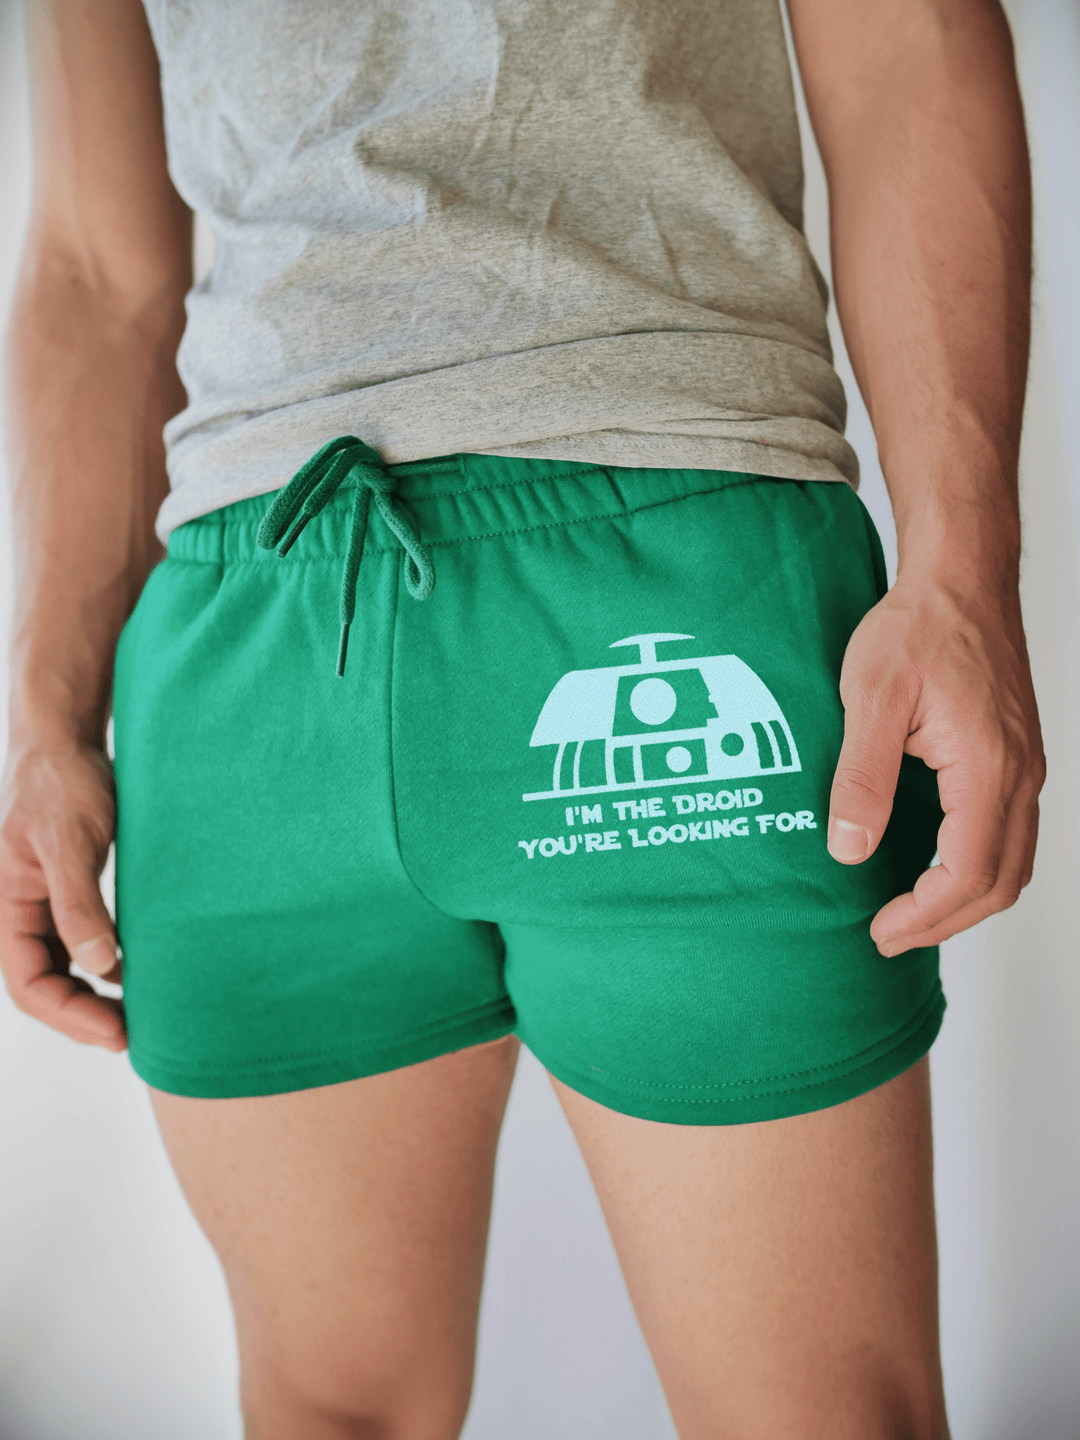 PixelThat Punderwear Shorts Kelly Green / S / Front I'm The Droid Men's Gym Shorts